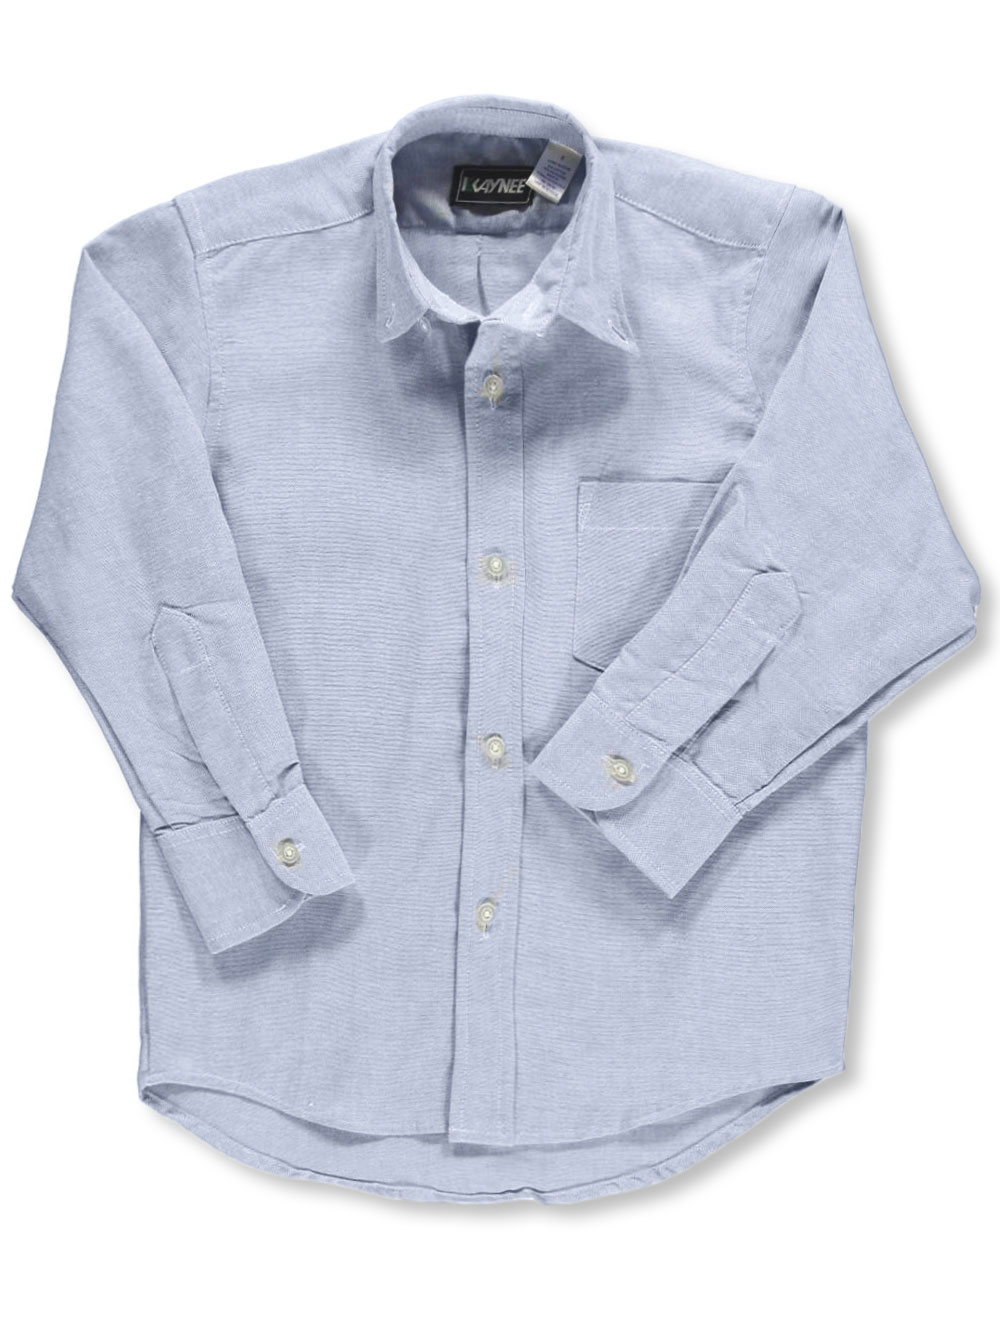 Size 16 Button-Downs for Boys